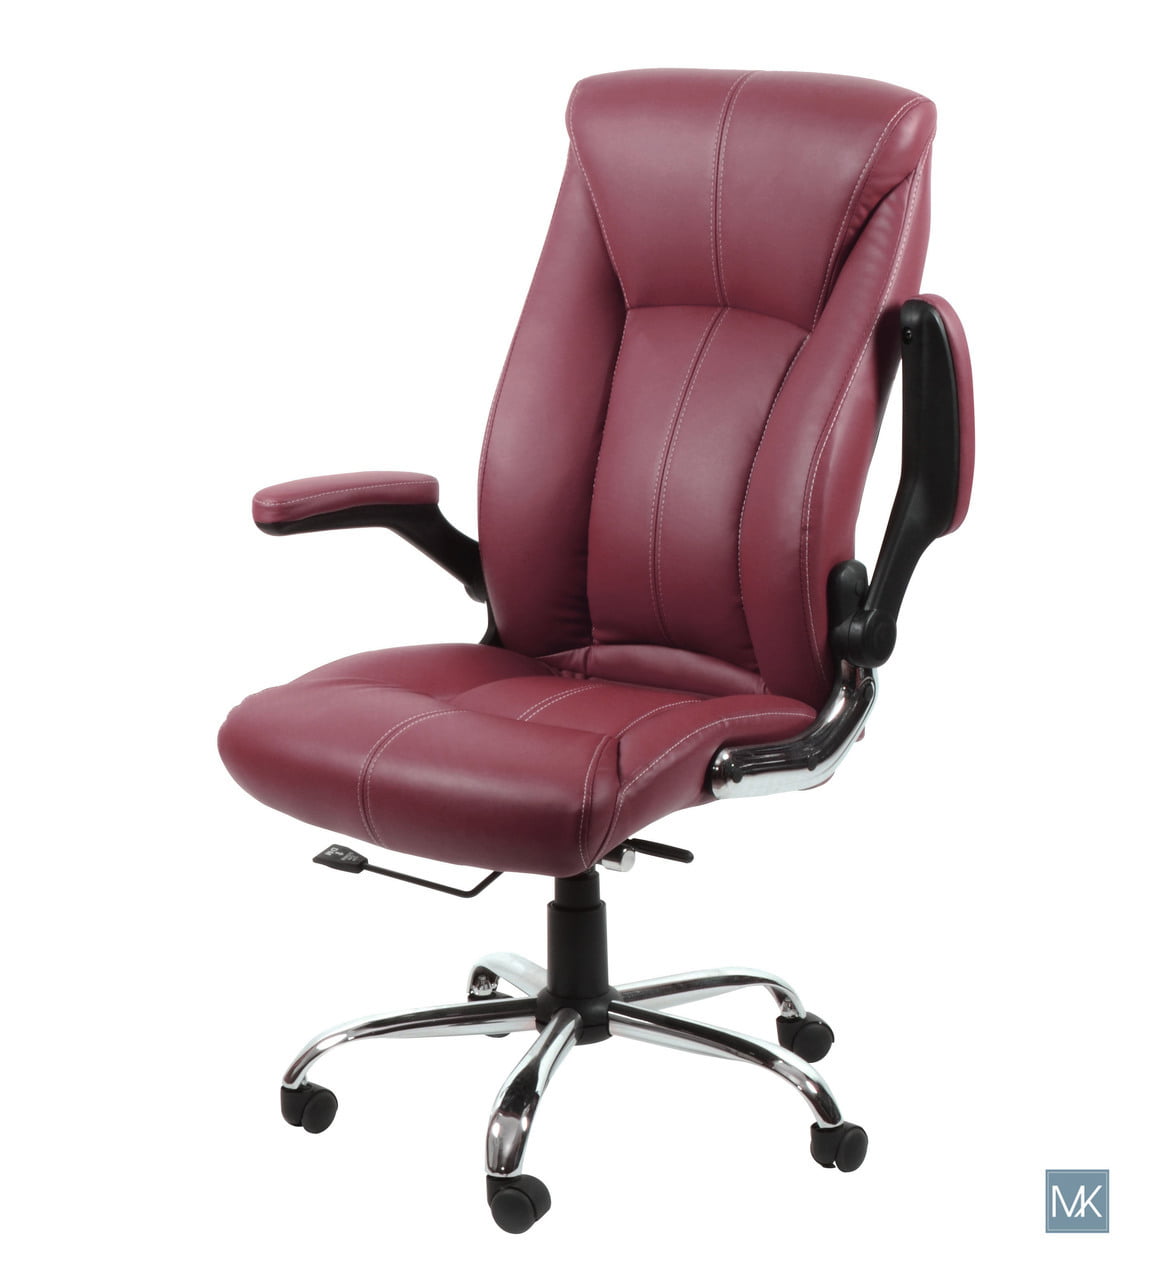 Max Comfort Office Chairs ARION BURGUNDY Desk Chairs for Office